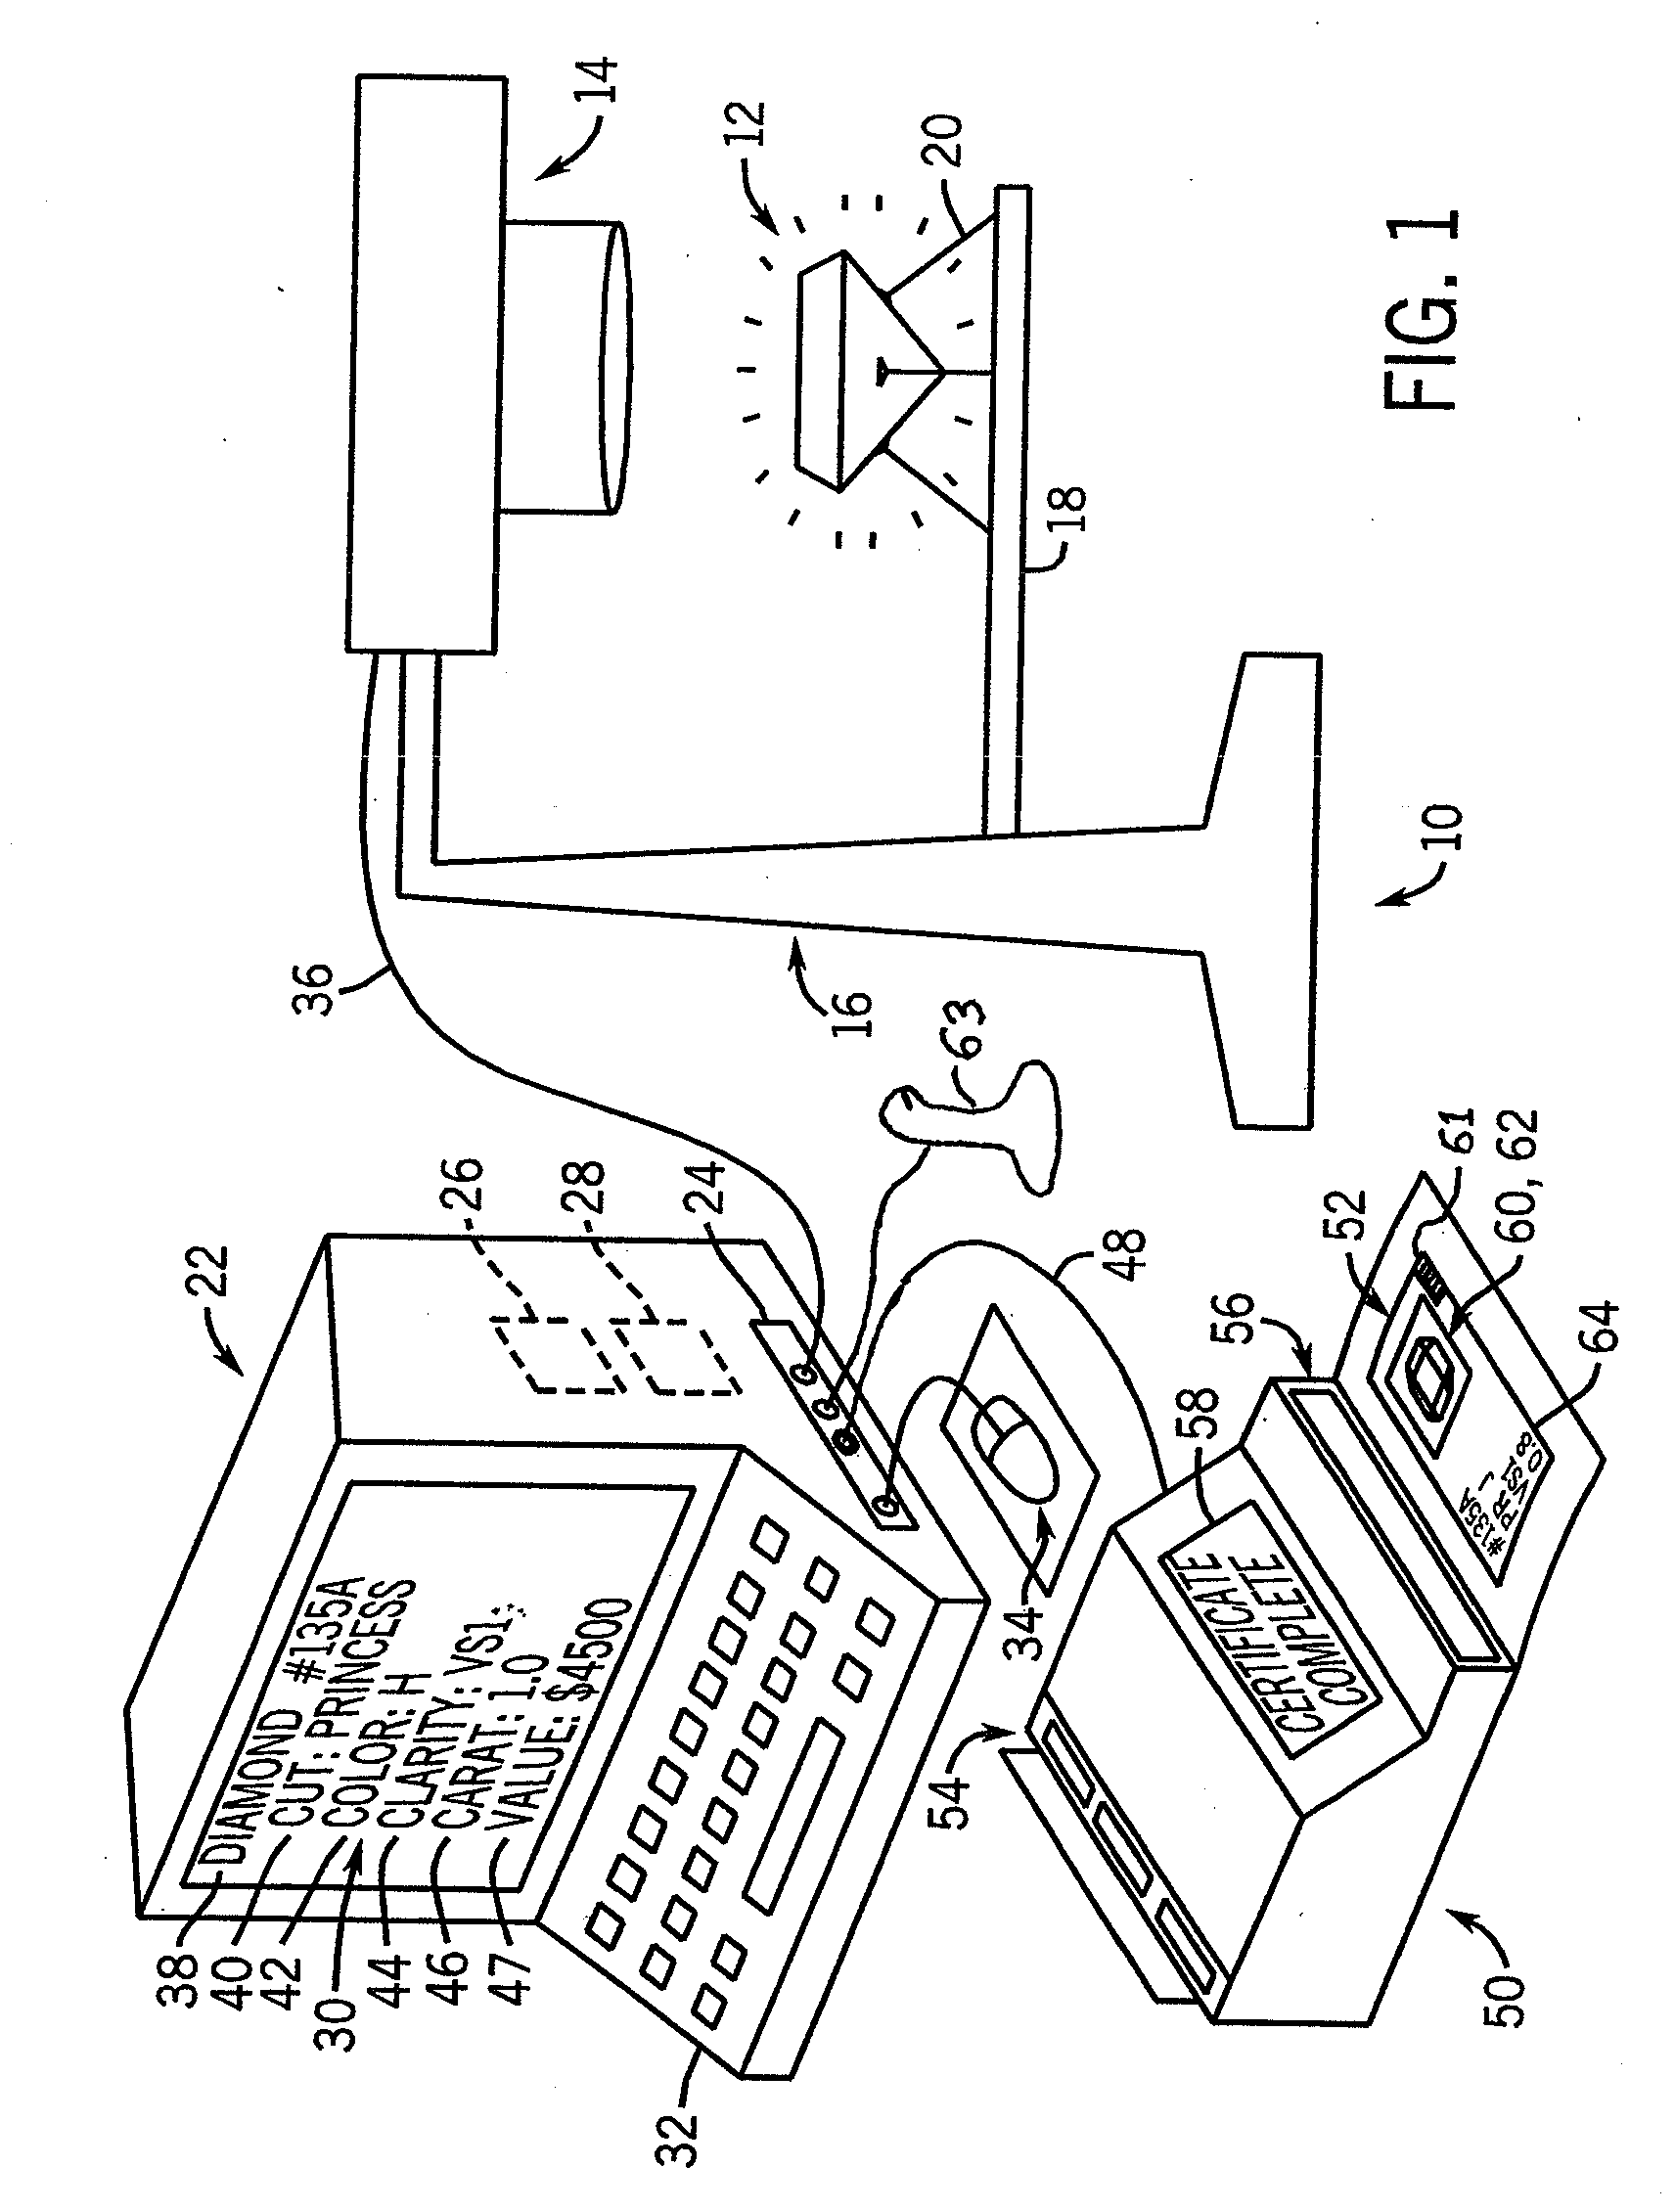 Method and System for Facilitating Verification of Ownership Status of a Jewelry-Related Item